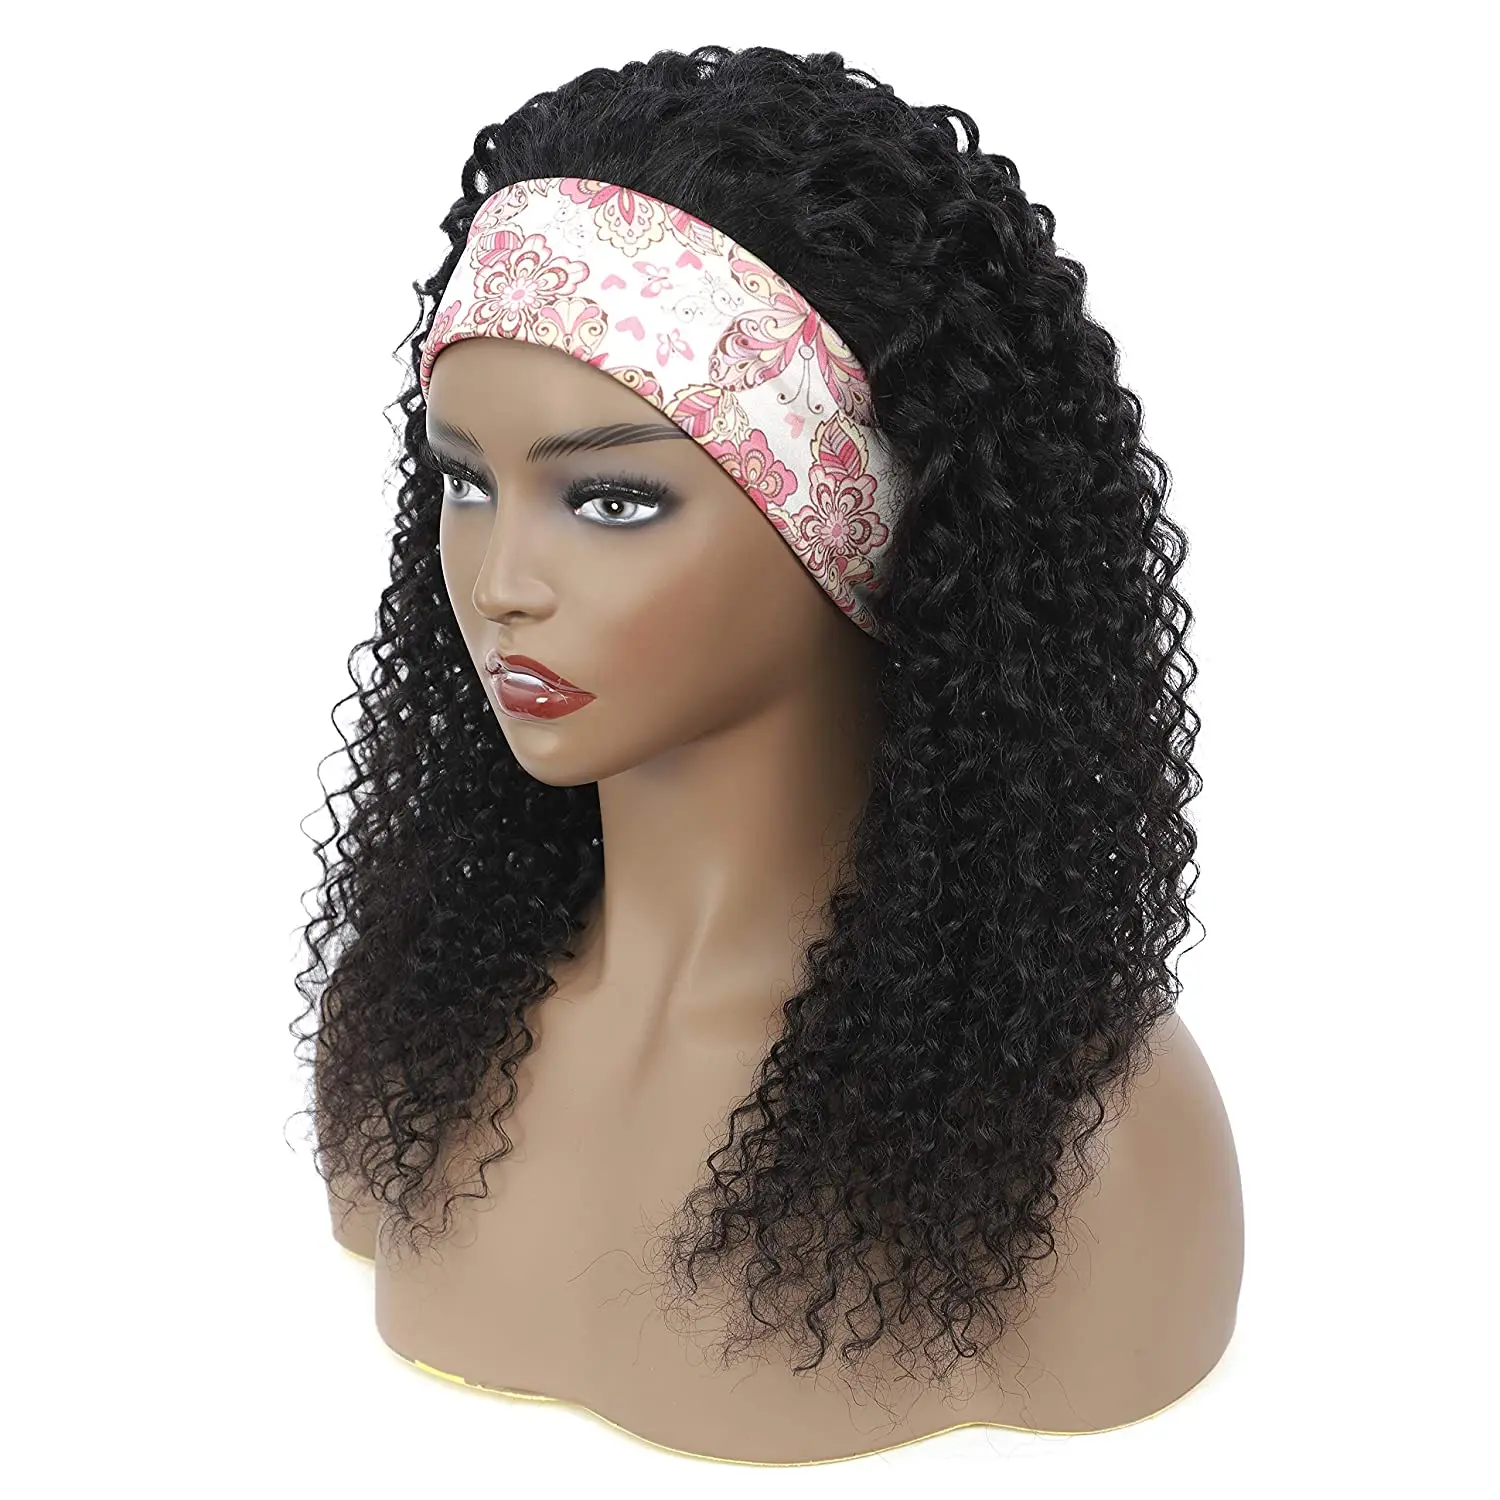 DLME 100% Human Hair Grip Headband Scarf Wig Curly Human Hair Wig No plucking wigs for Women No Glue No Sew In enlarge